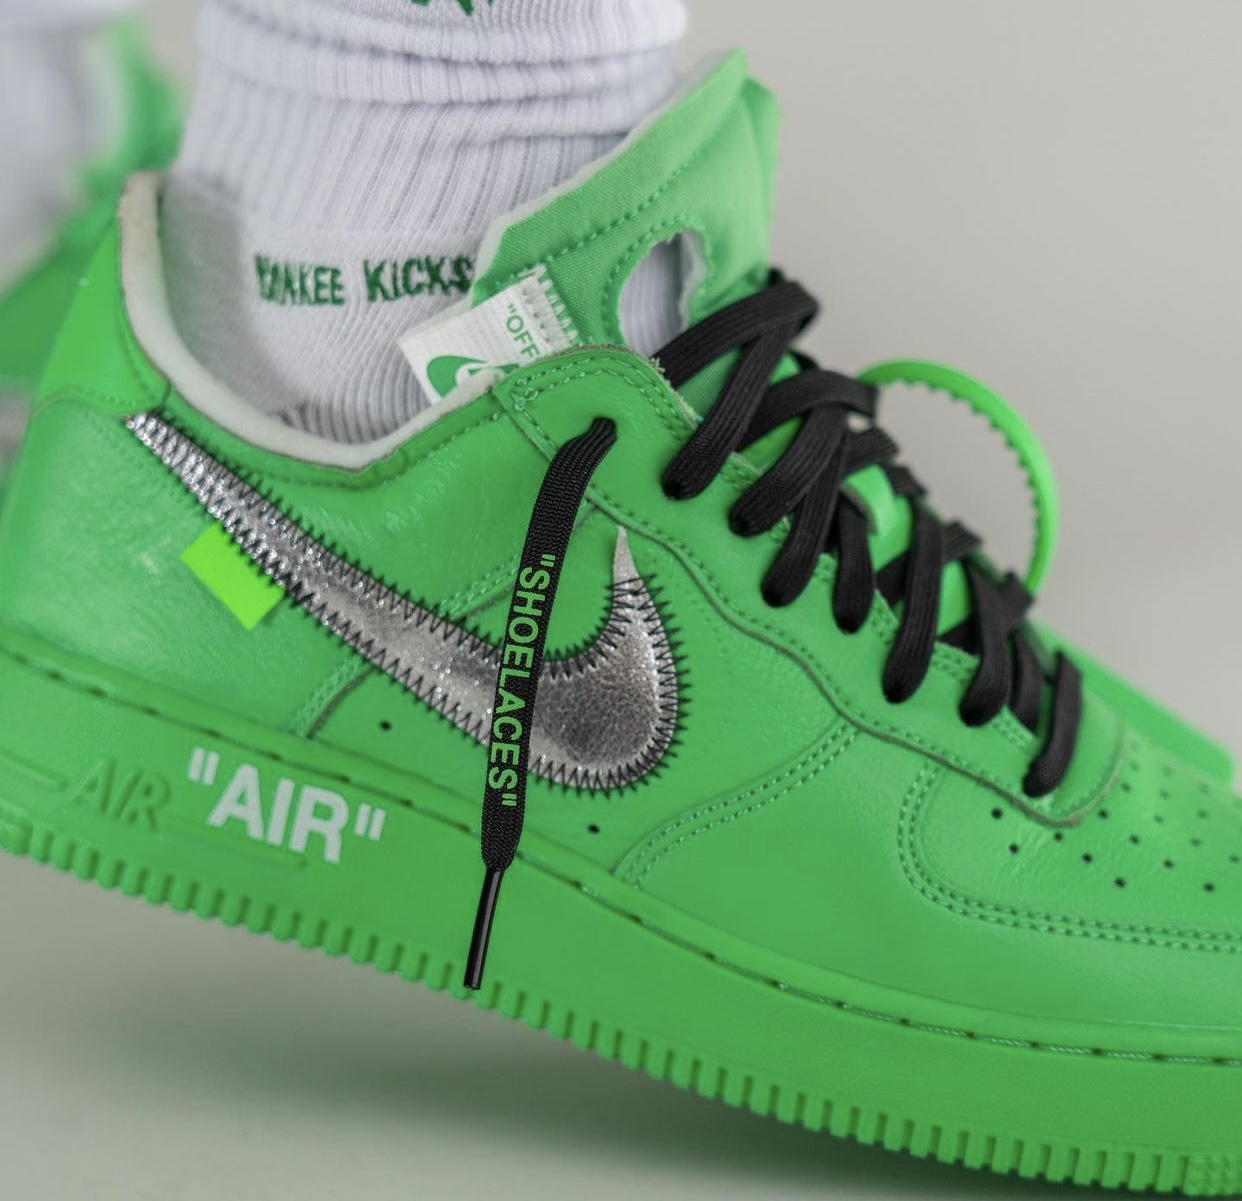 Off-White Nike Air Force 1 Low Light Verde Spark On-Feet DX1419-300 Data di rilascio